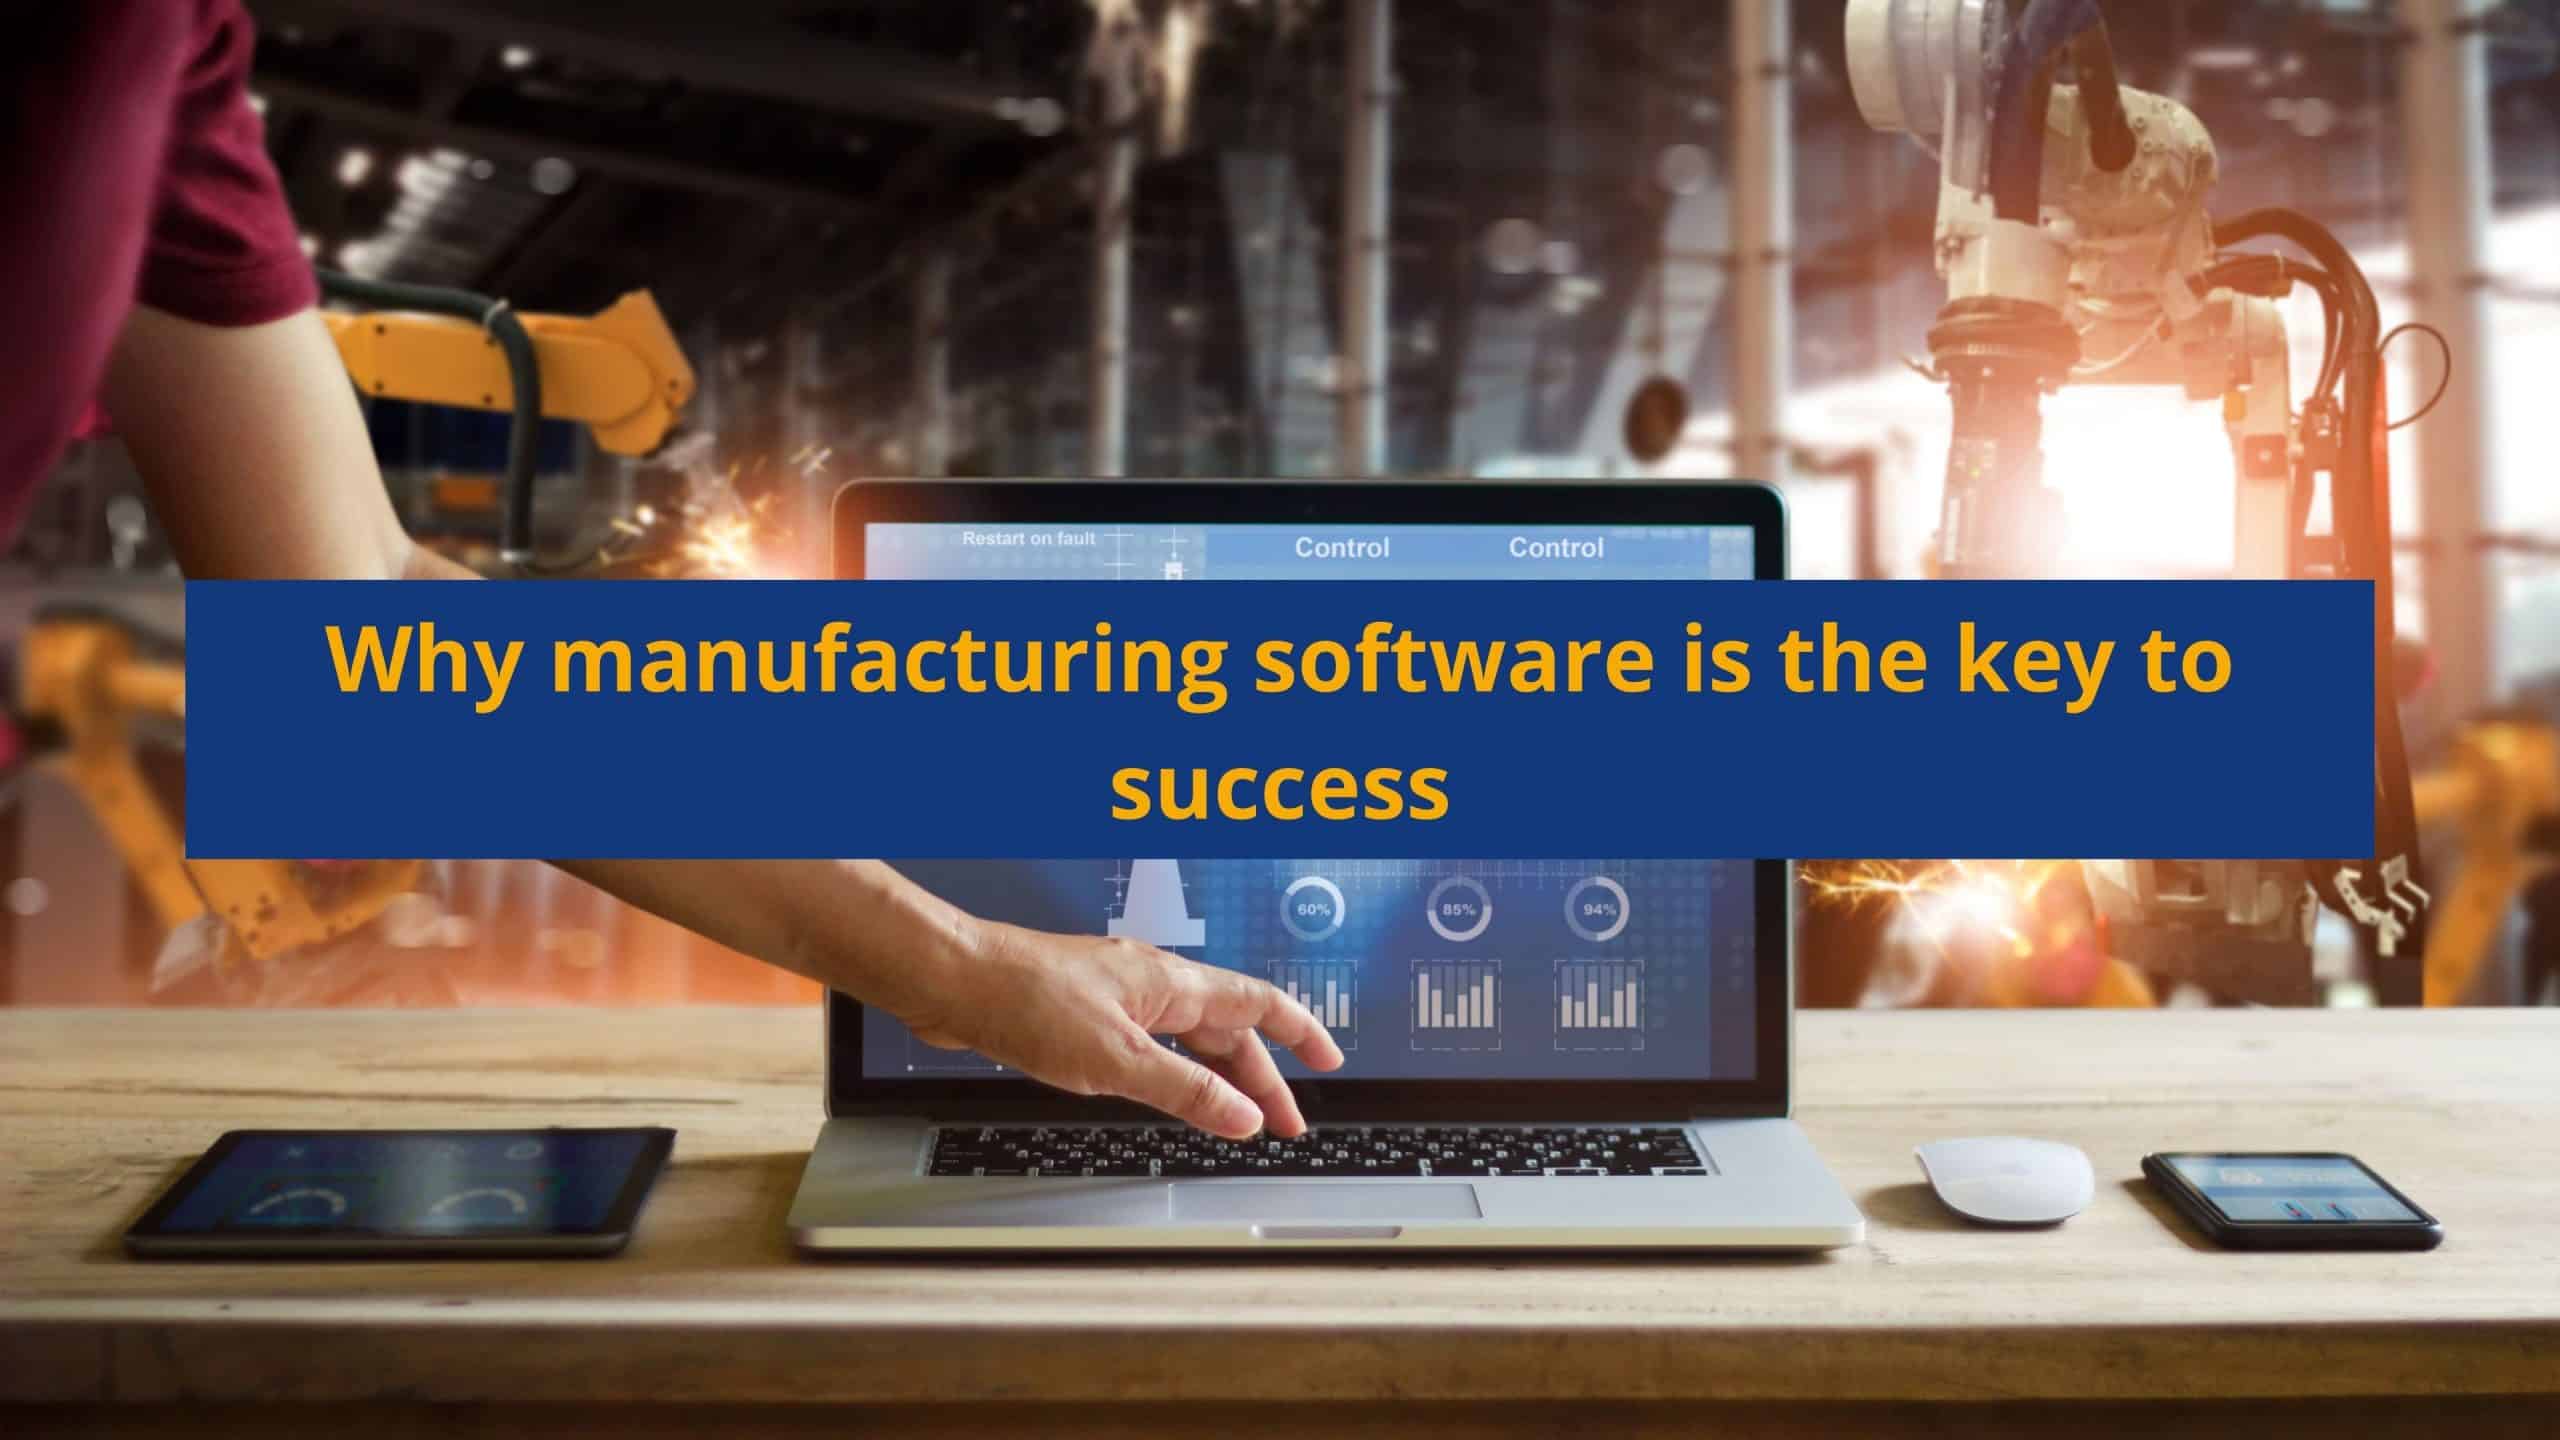 Why manufacturing software is the key to success